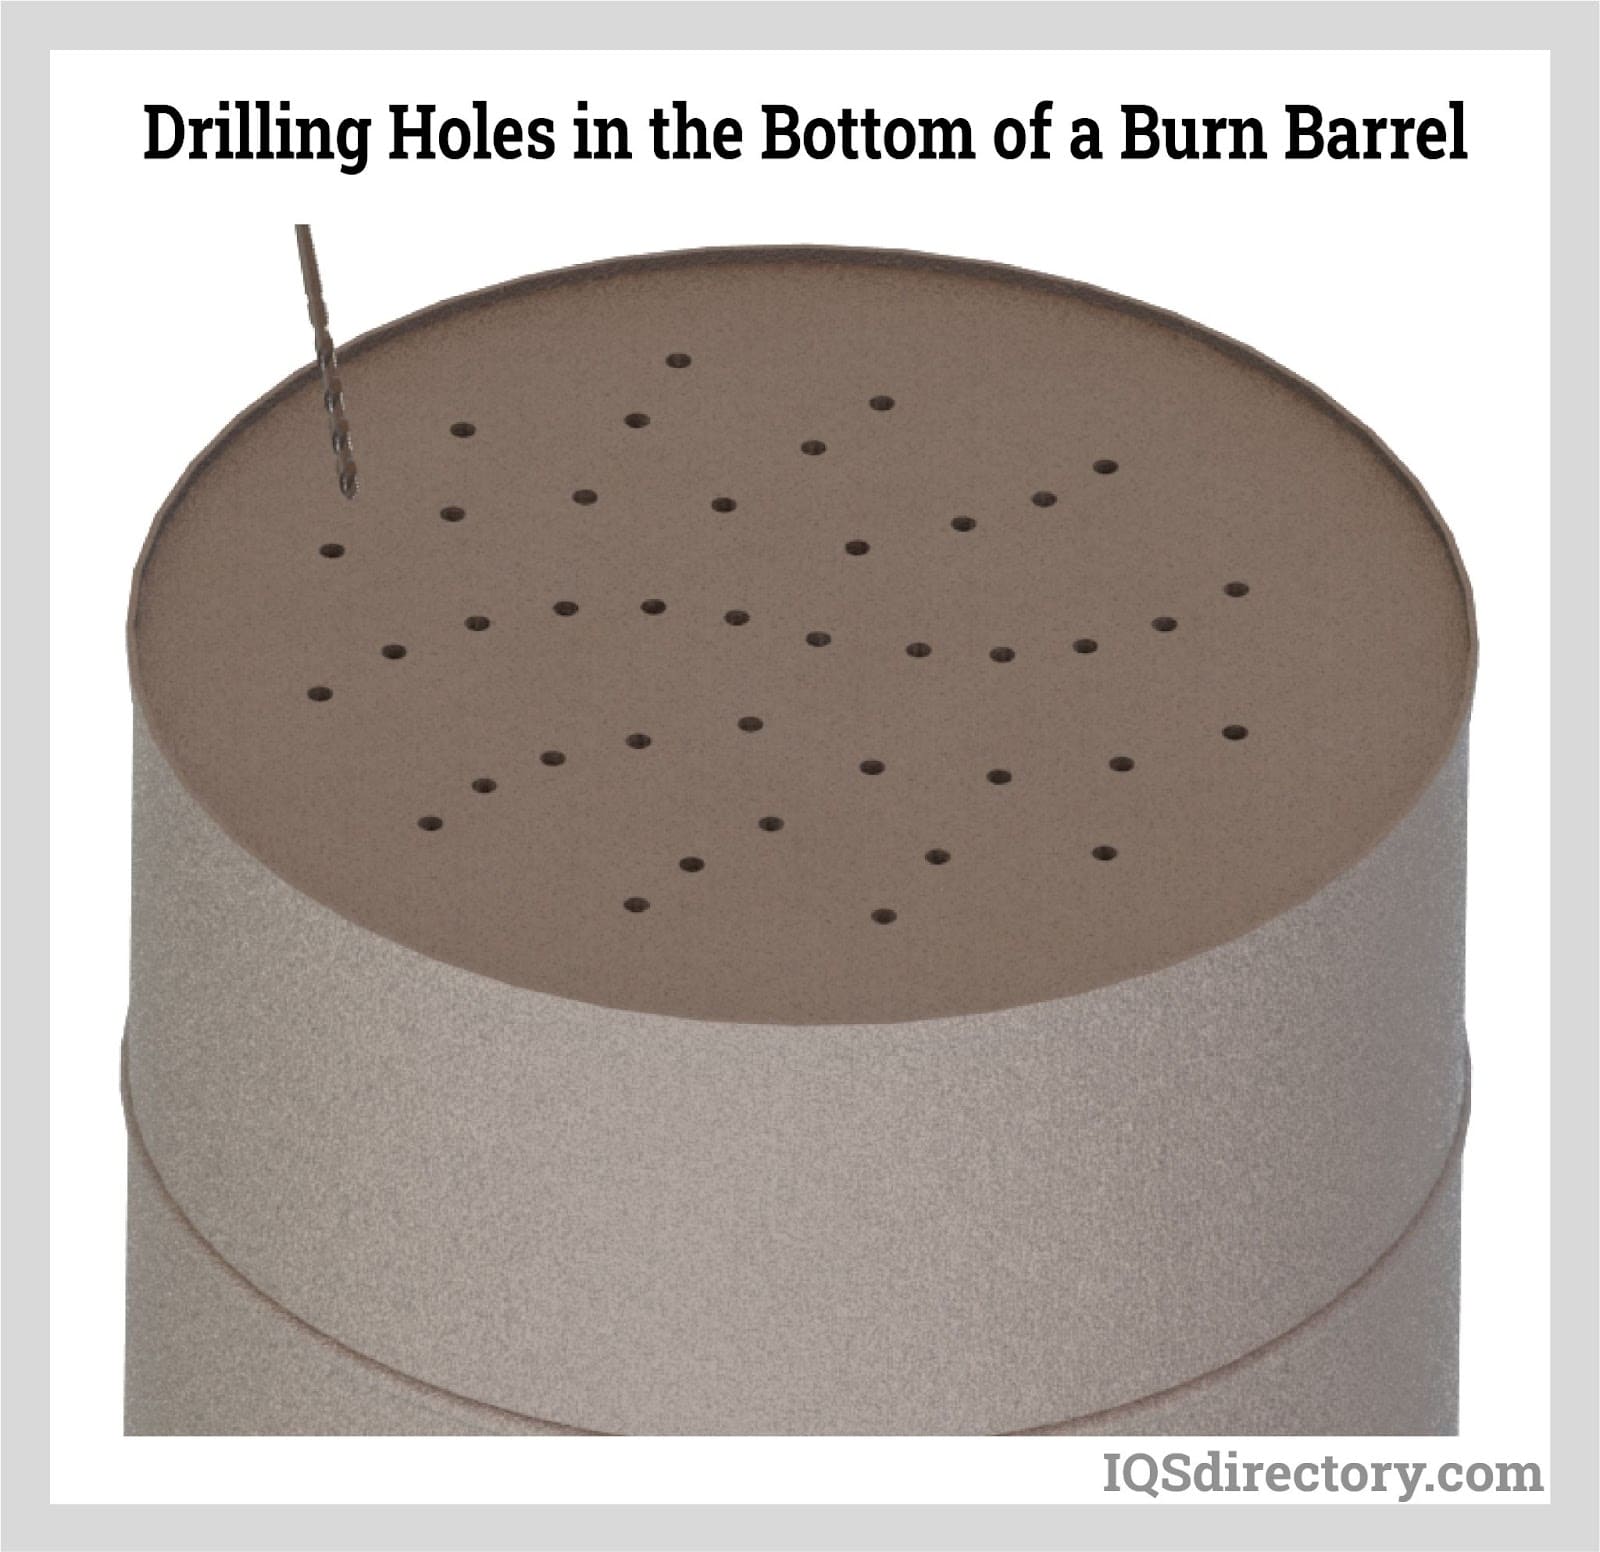 Drilling Holes in the Bottom of a Burn Barrel